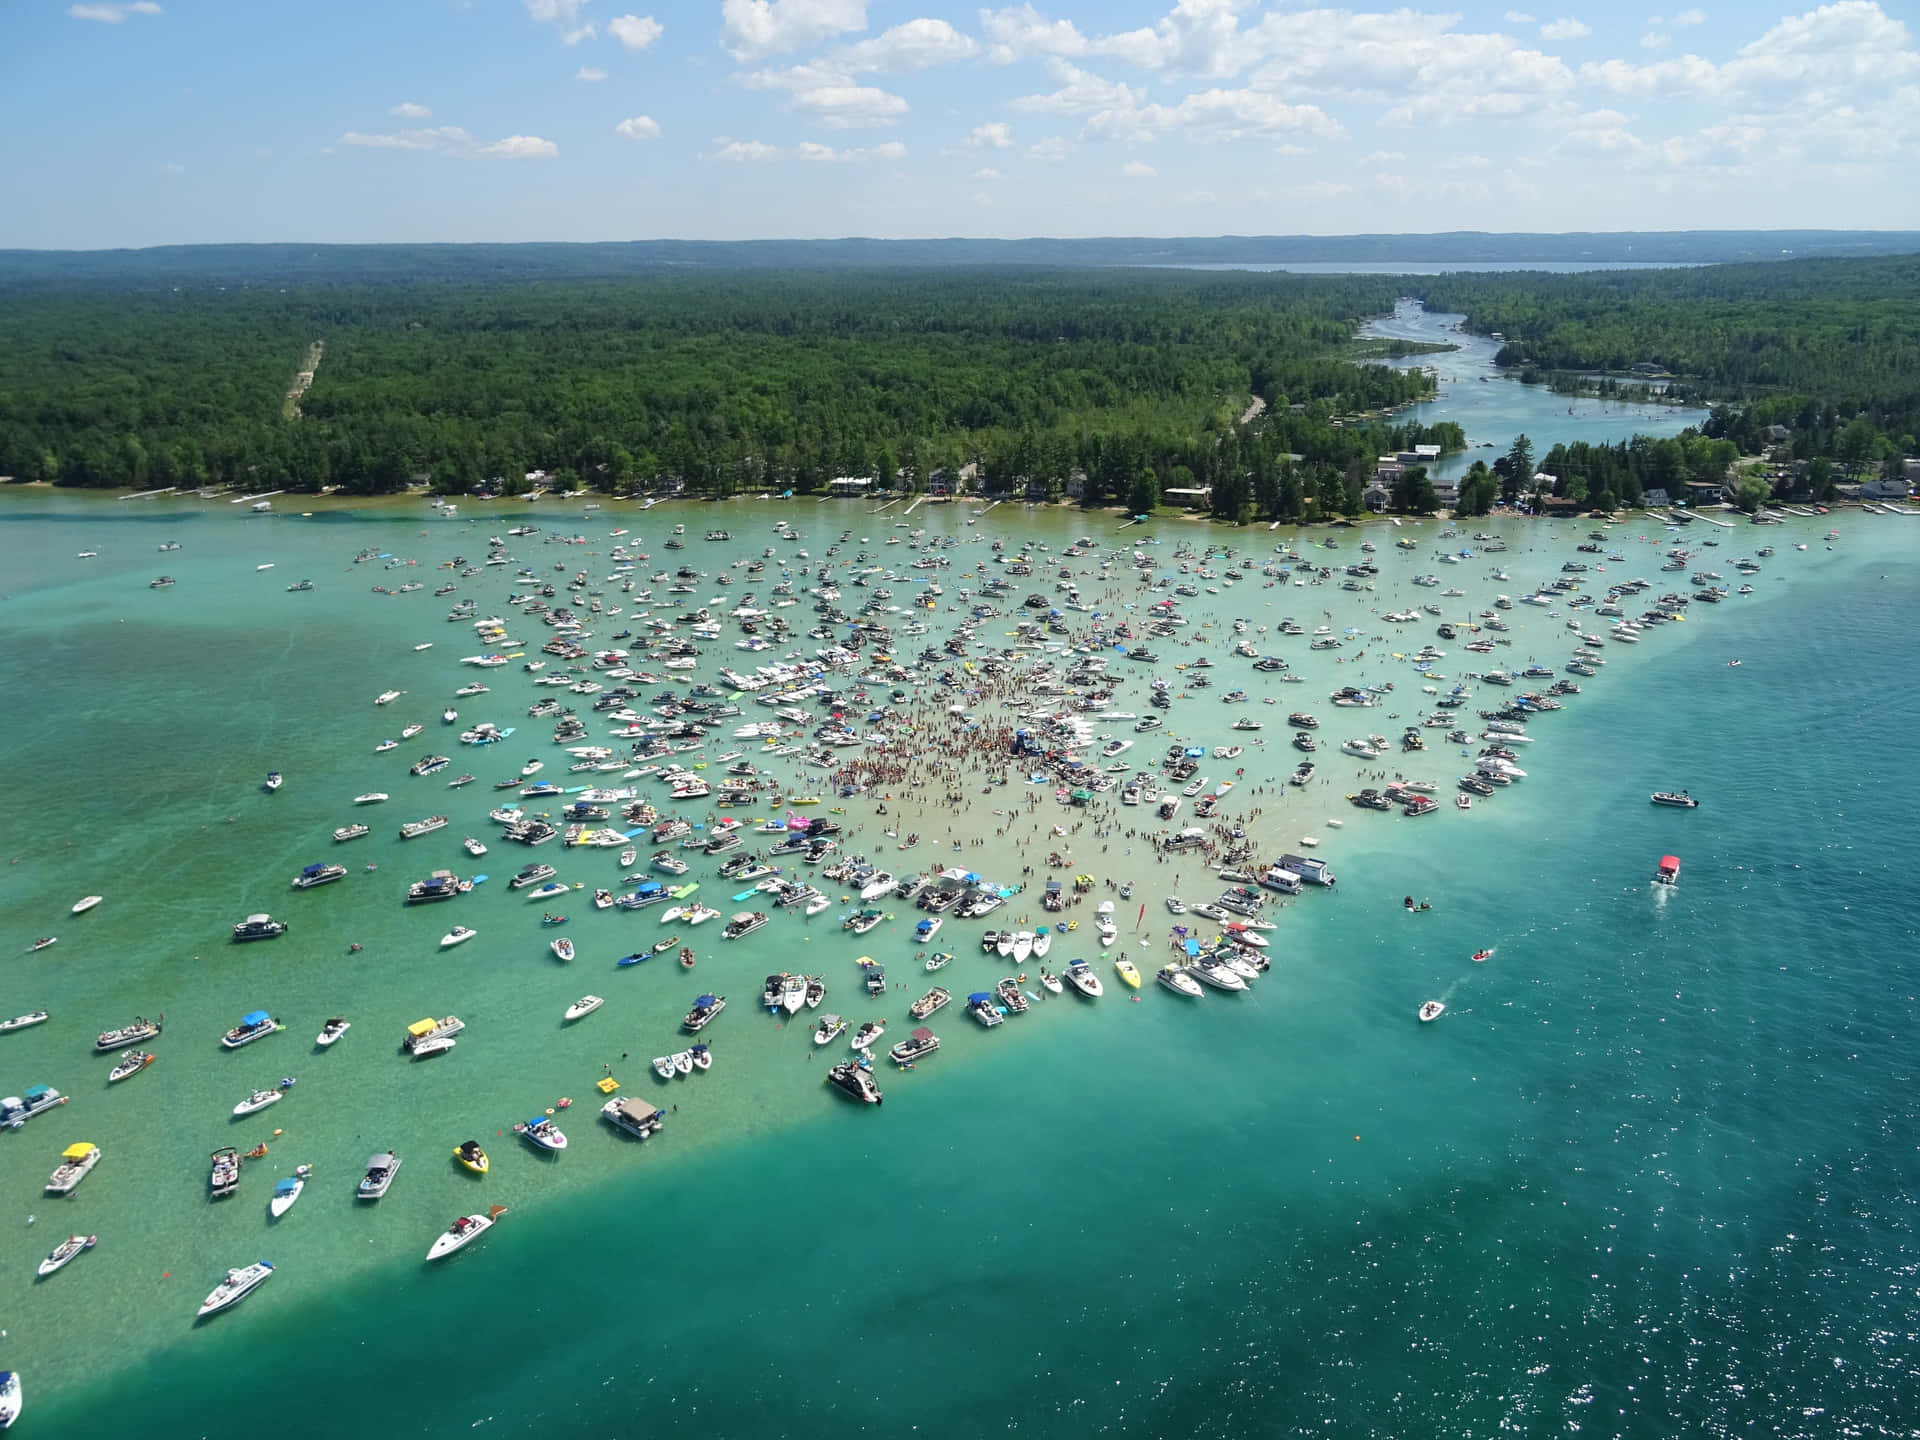 "Explore the Natural Beauty of Torch Lake"